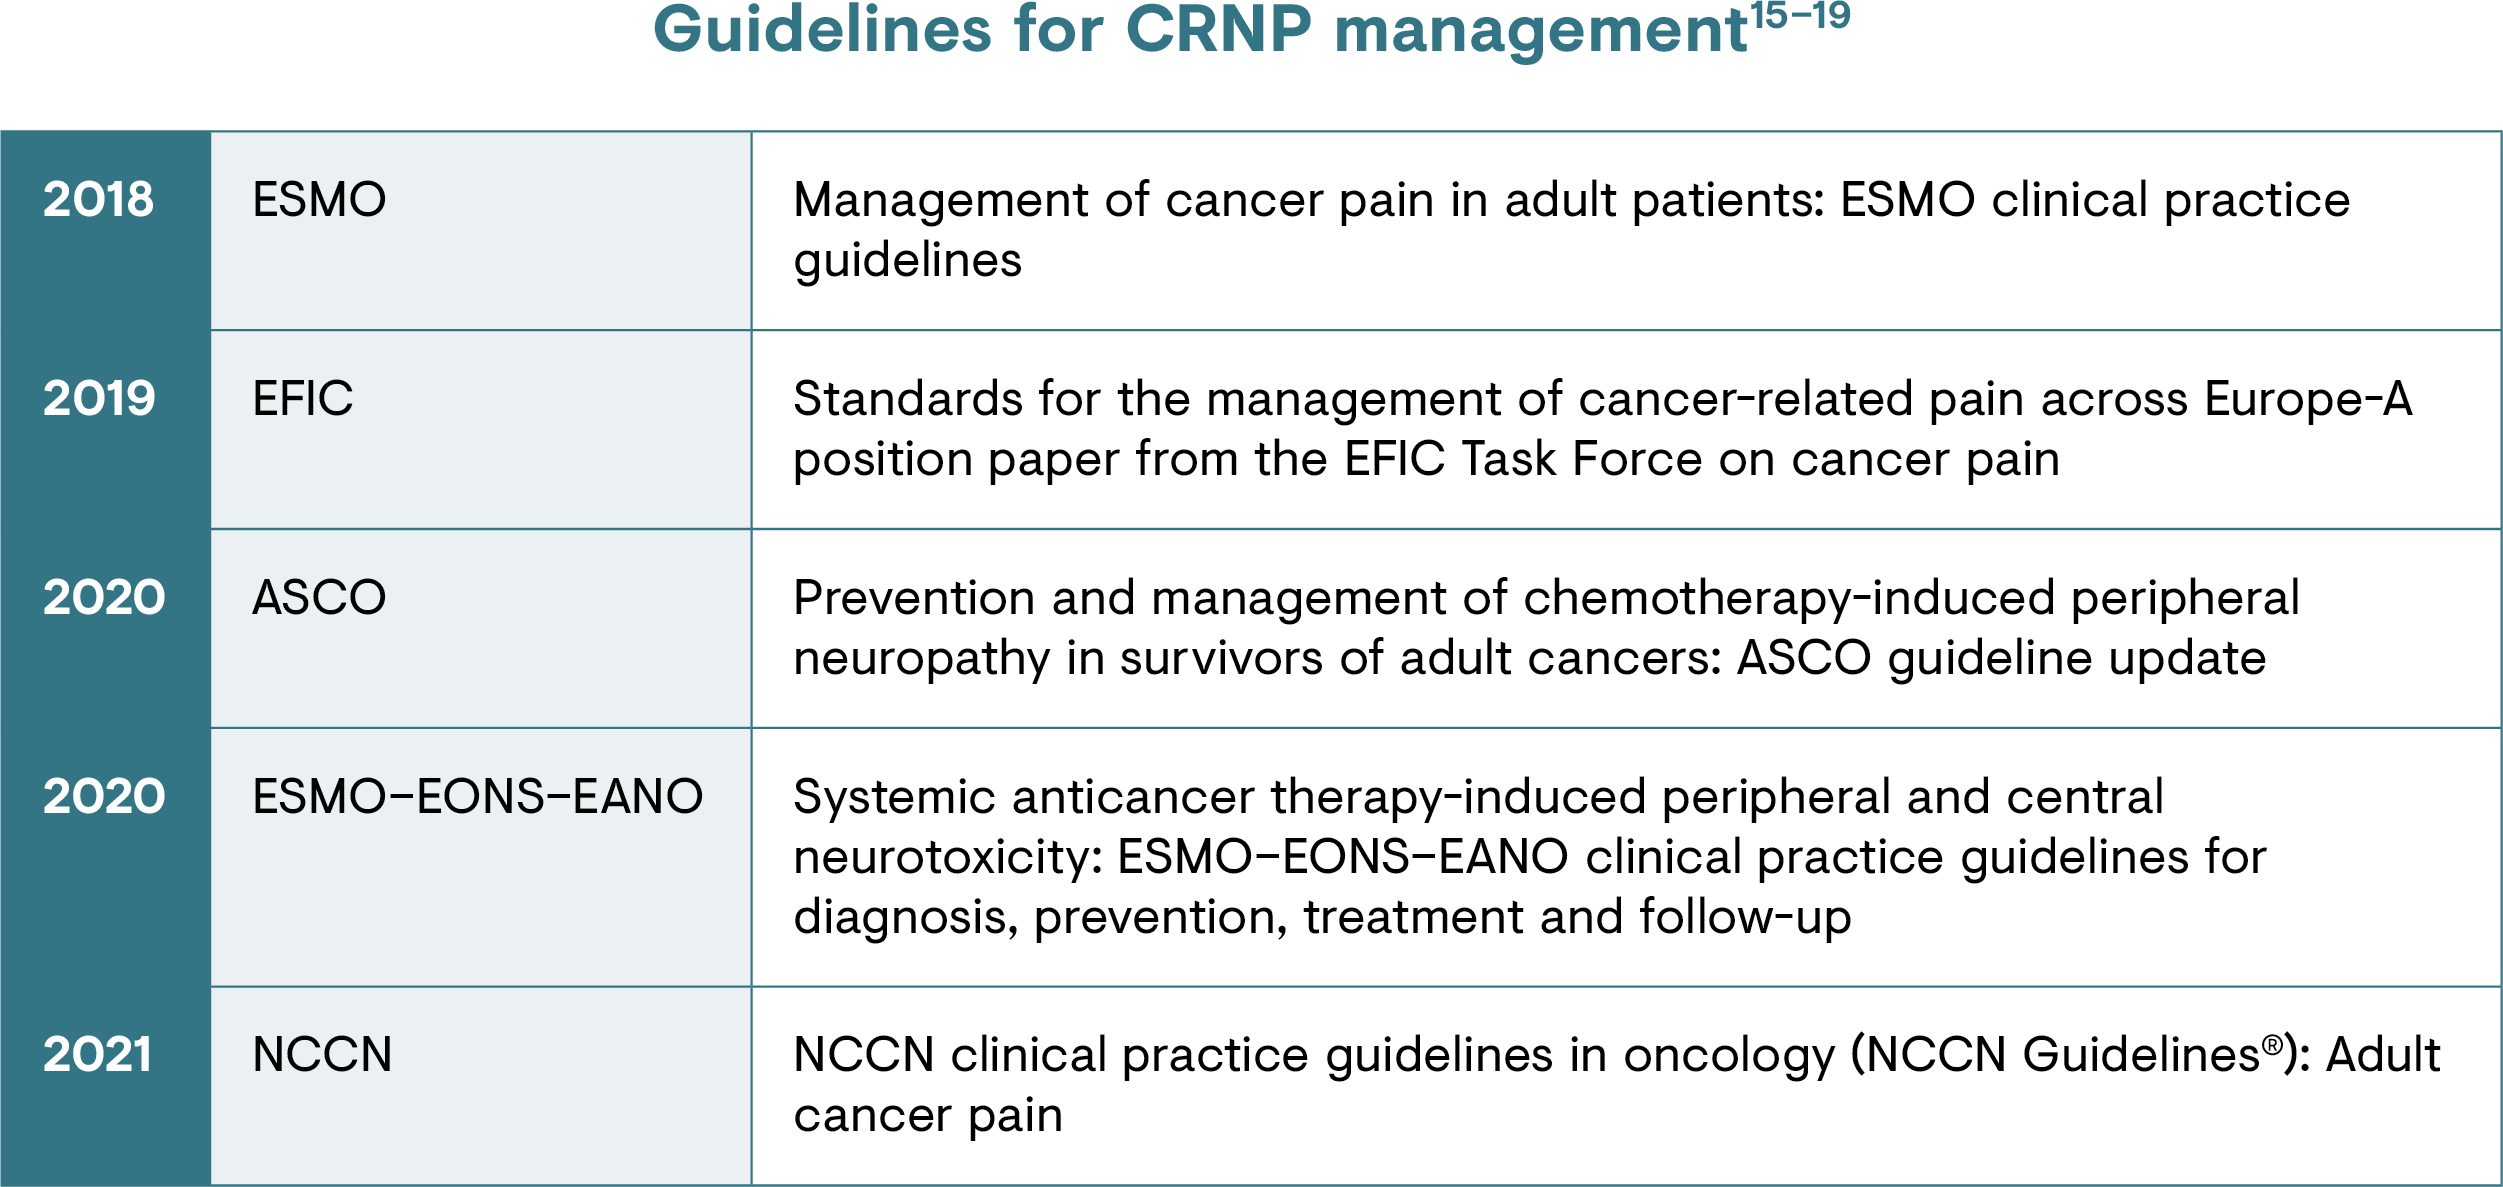 List of guidelines for cancer-related pain management.